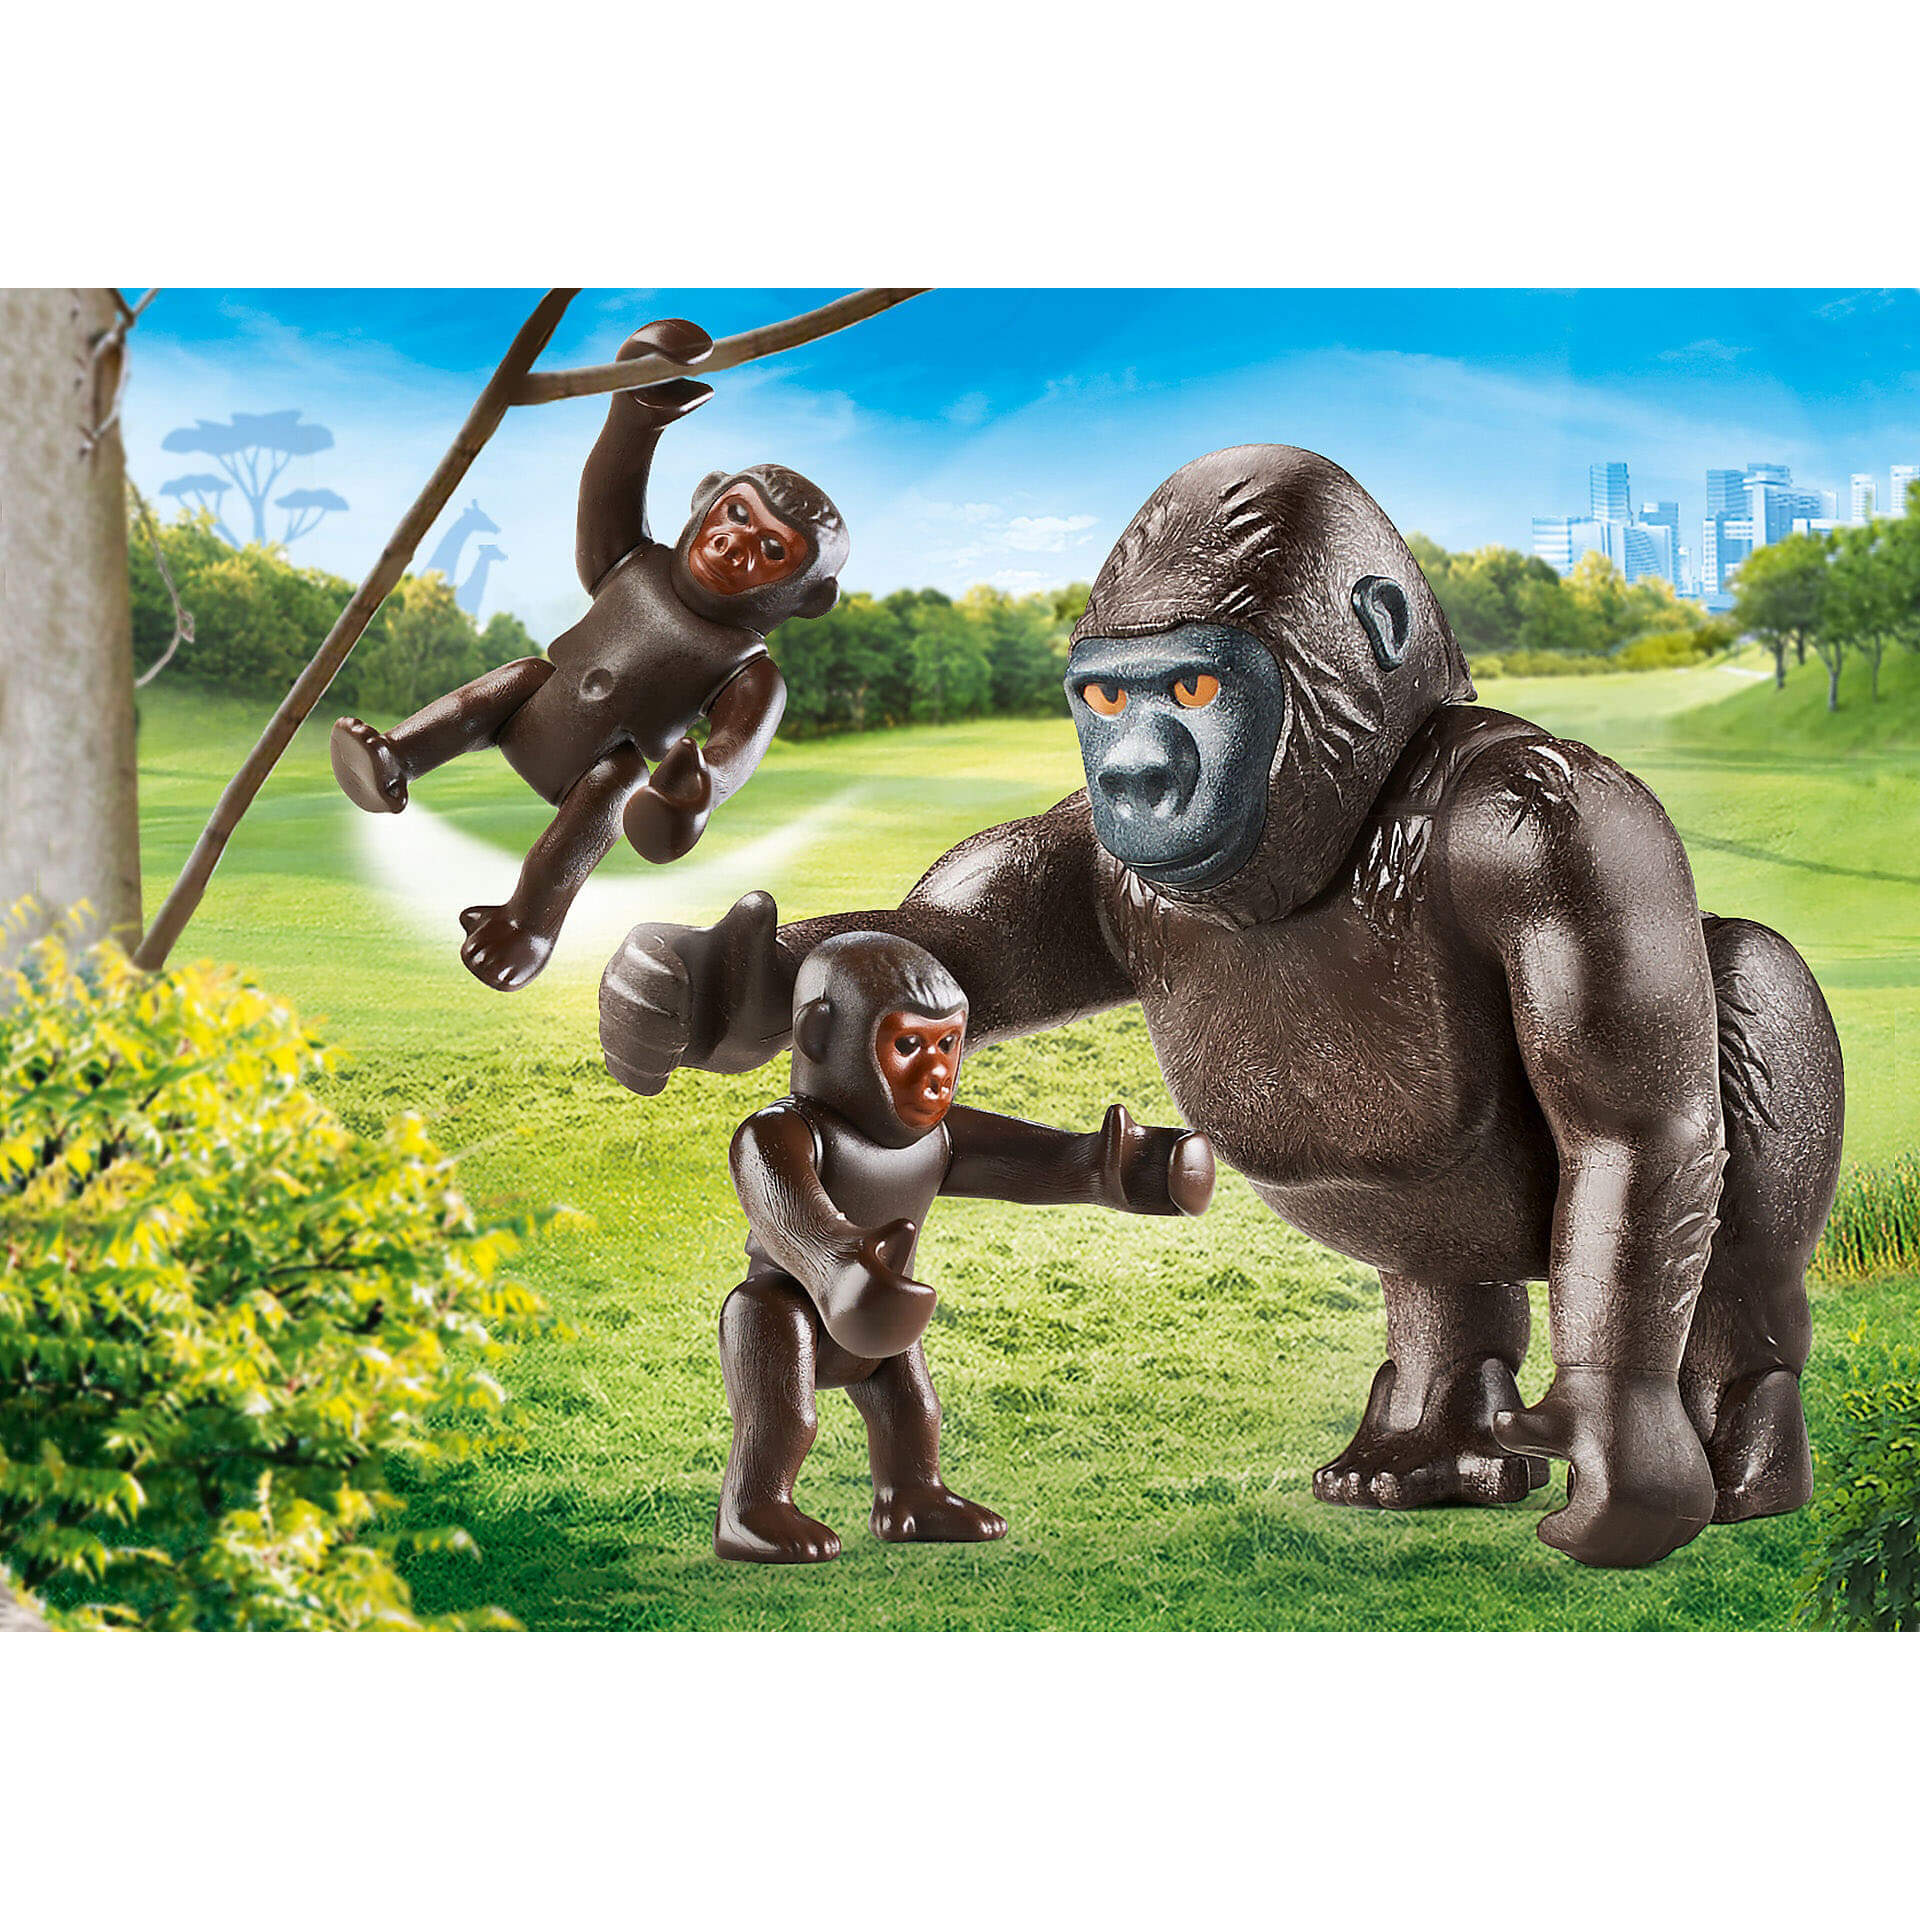 PLAYMOBIL Family Fun Large Zoo (70341) for sale online